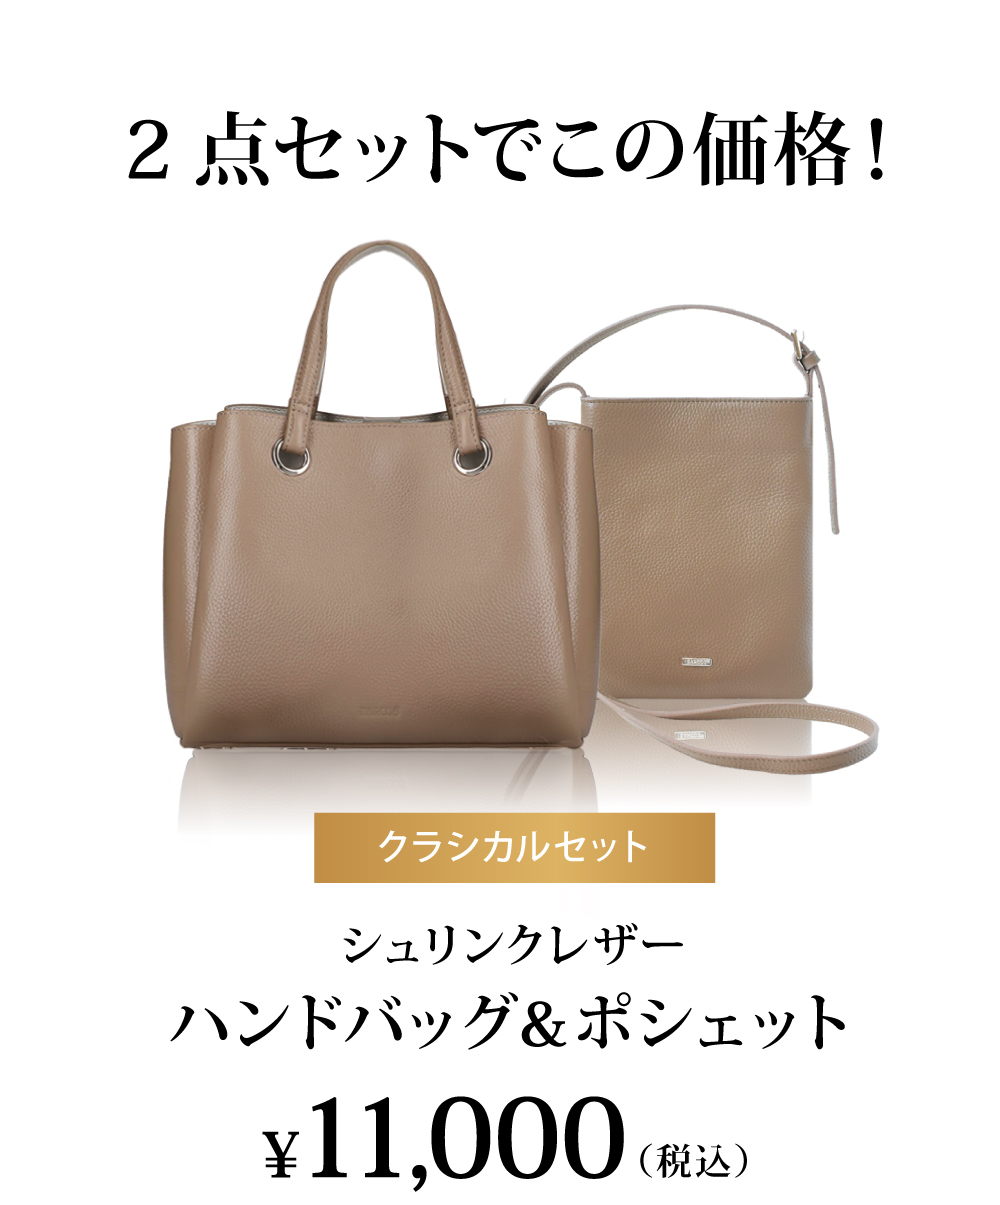 BARCOS PREMIUM COLLECTION クラシカルセット